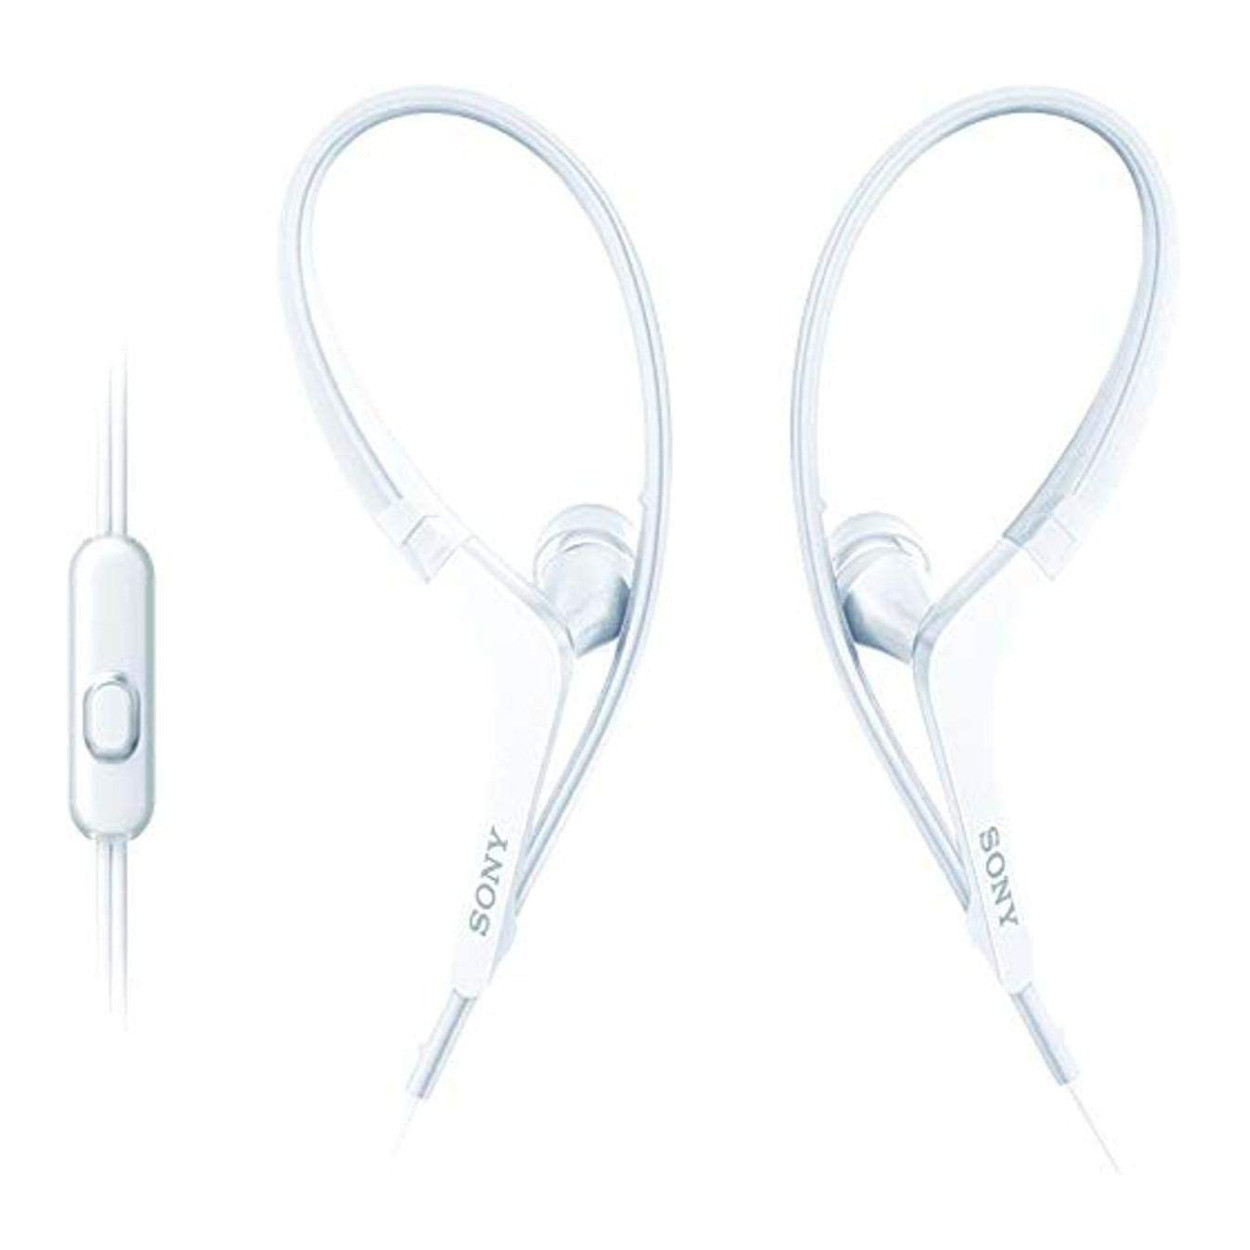 Sony AS410AP Sports In-Ear Headphones $9 + free s/h (less w/ SD cashback) @ Focus Camera